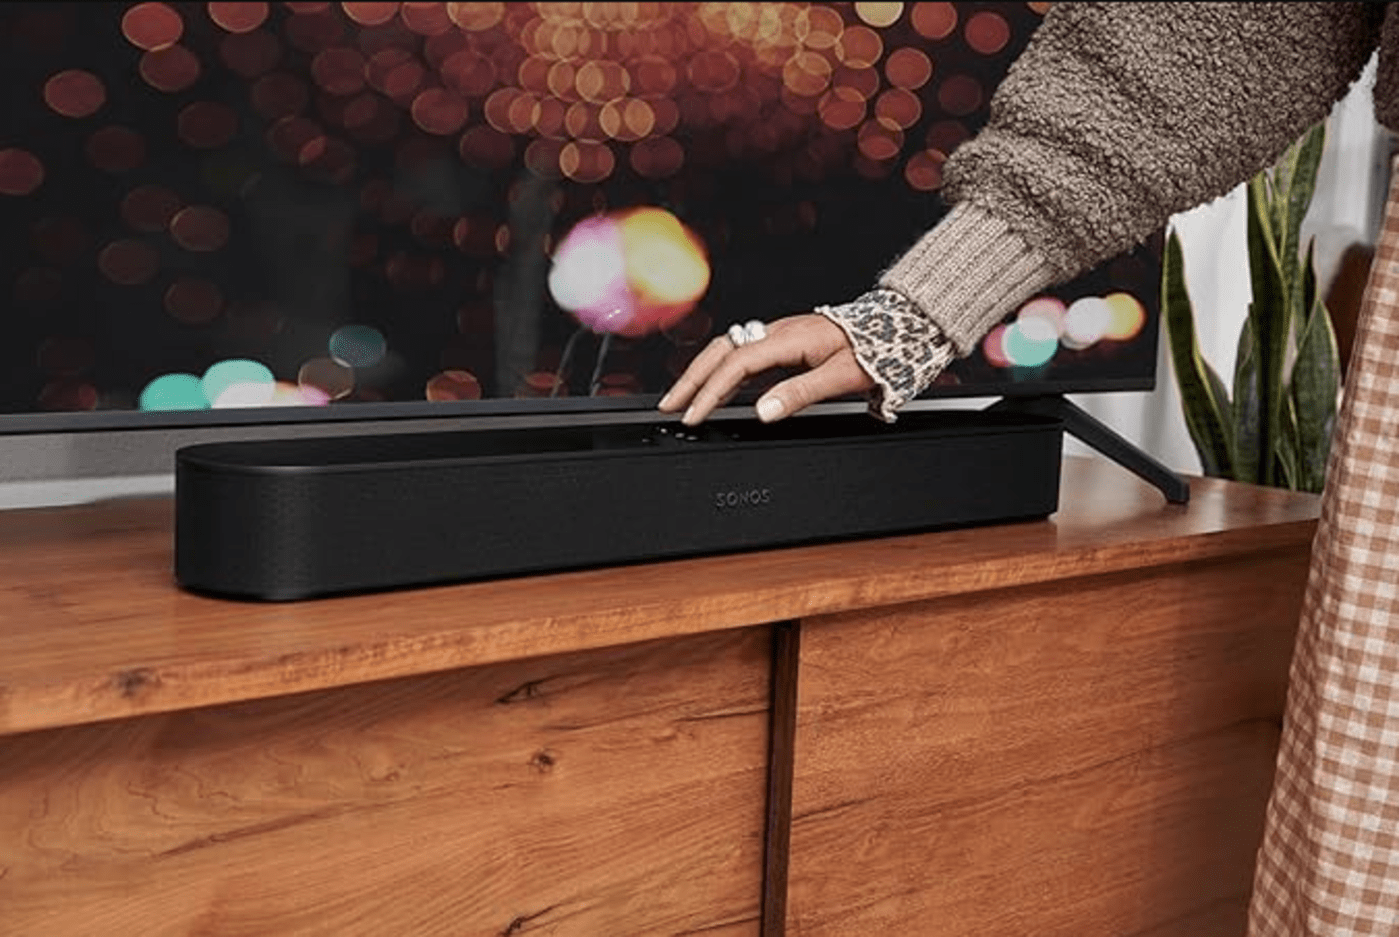 Sonos has discounted refurbished speakers and soundbars by up to 25 percent